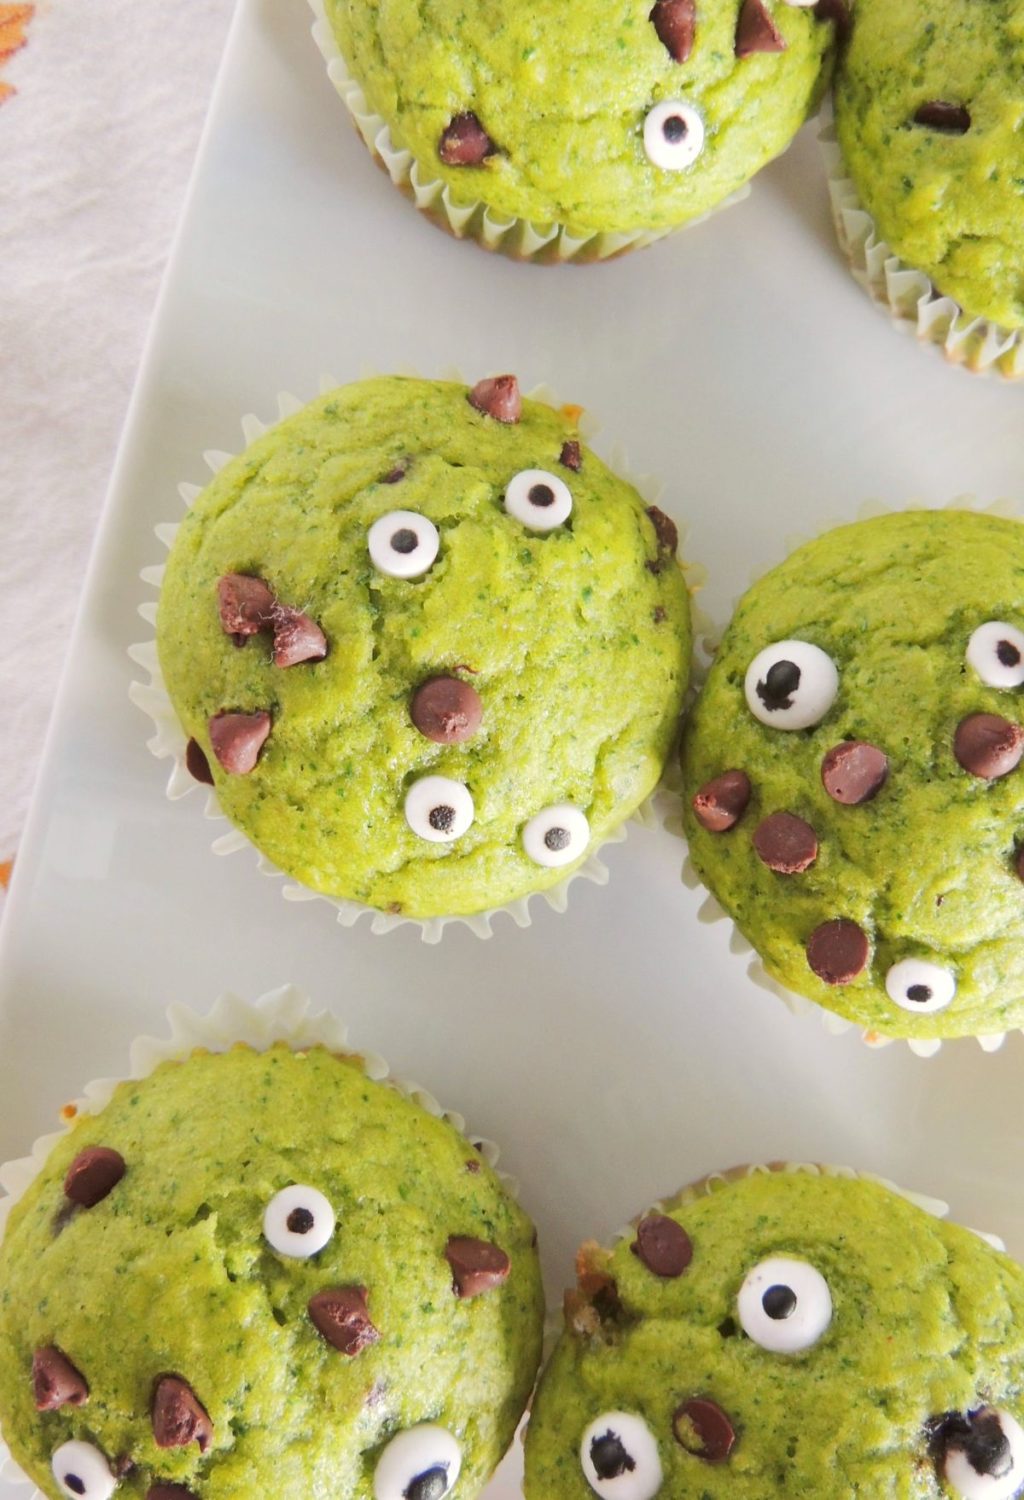 Green monster muffins with chocolate chip eyes on a plate.